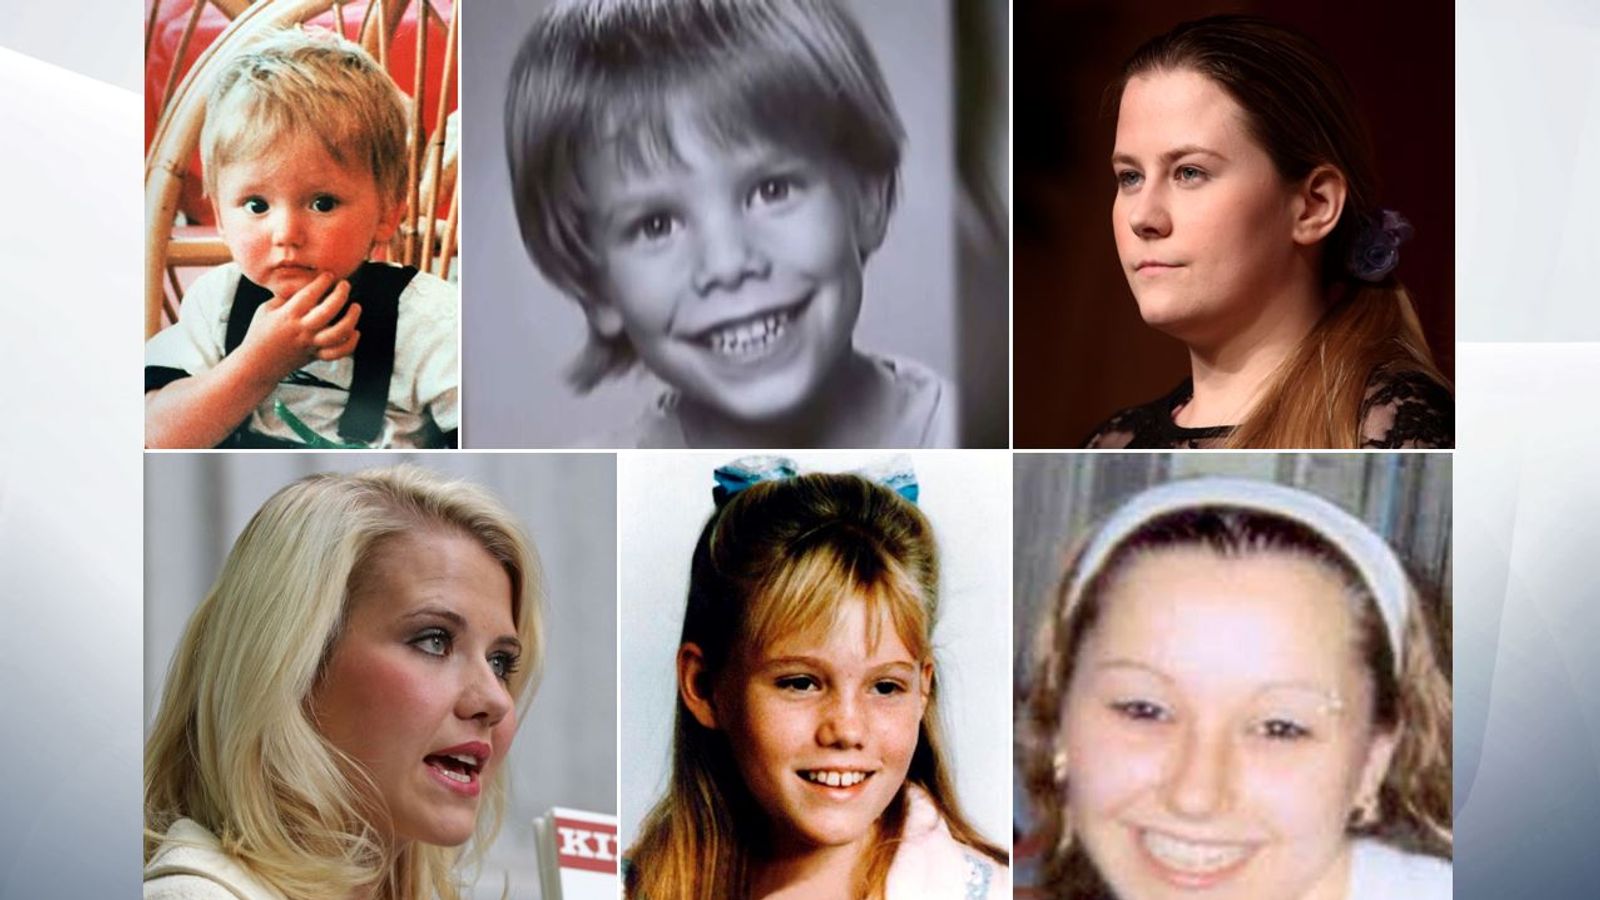 Missing children cases that shocked the world: What happened next?